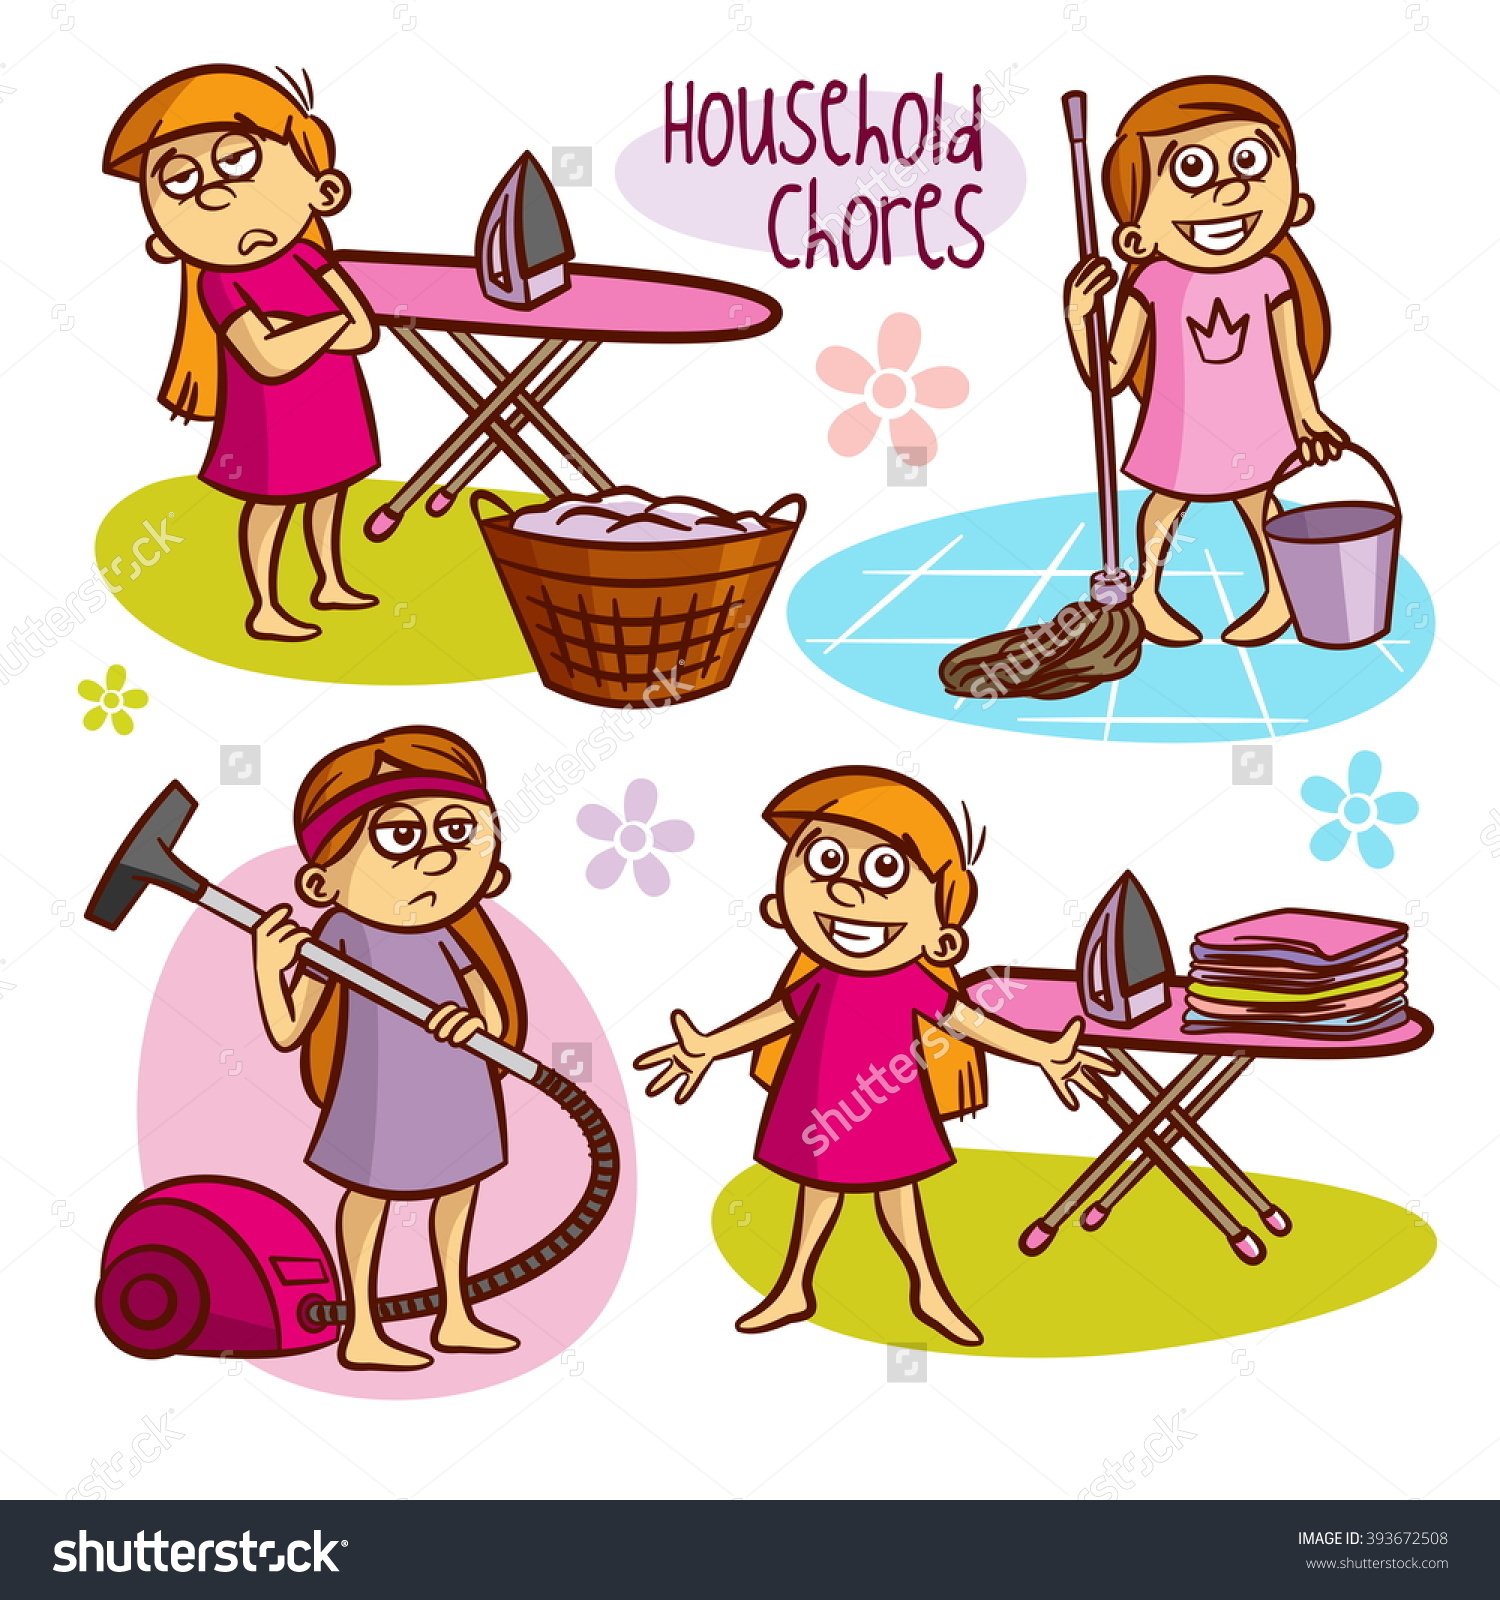 Chore clipart house.  collection of chores